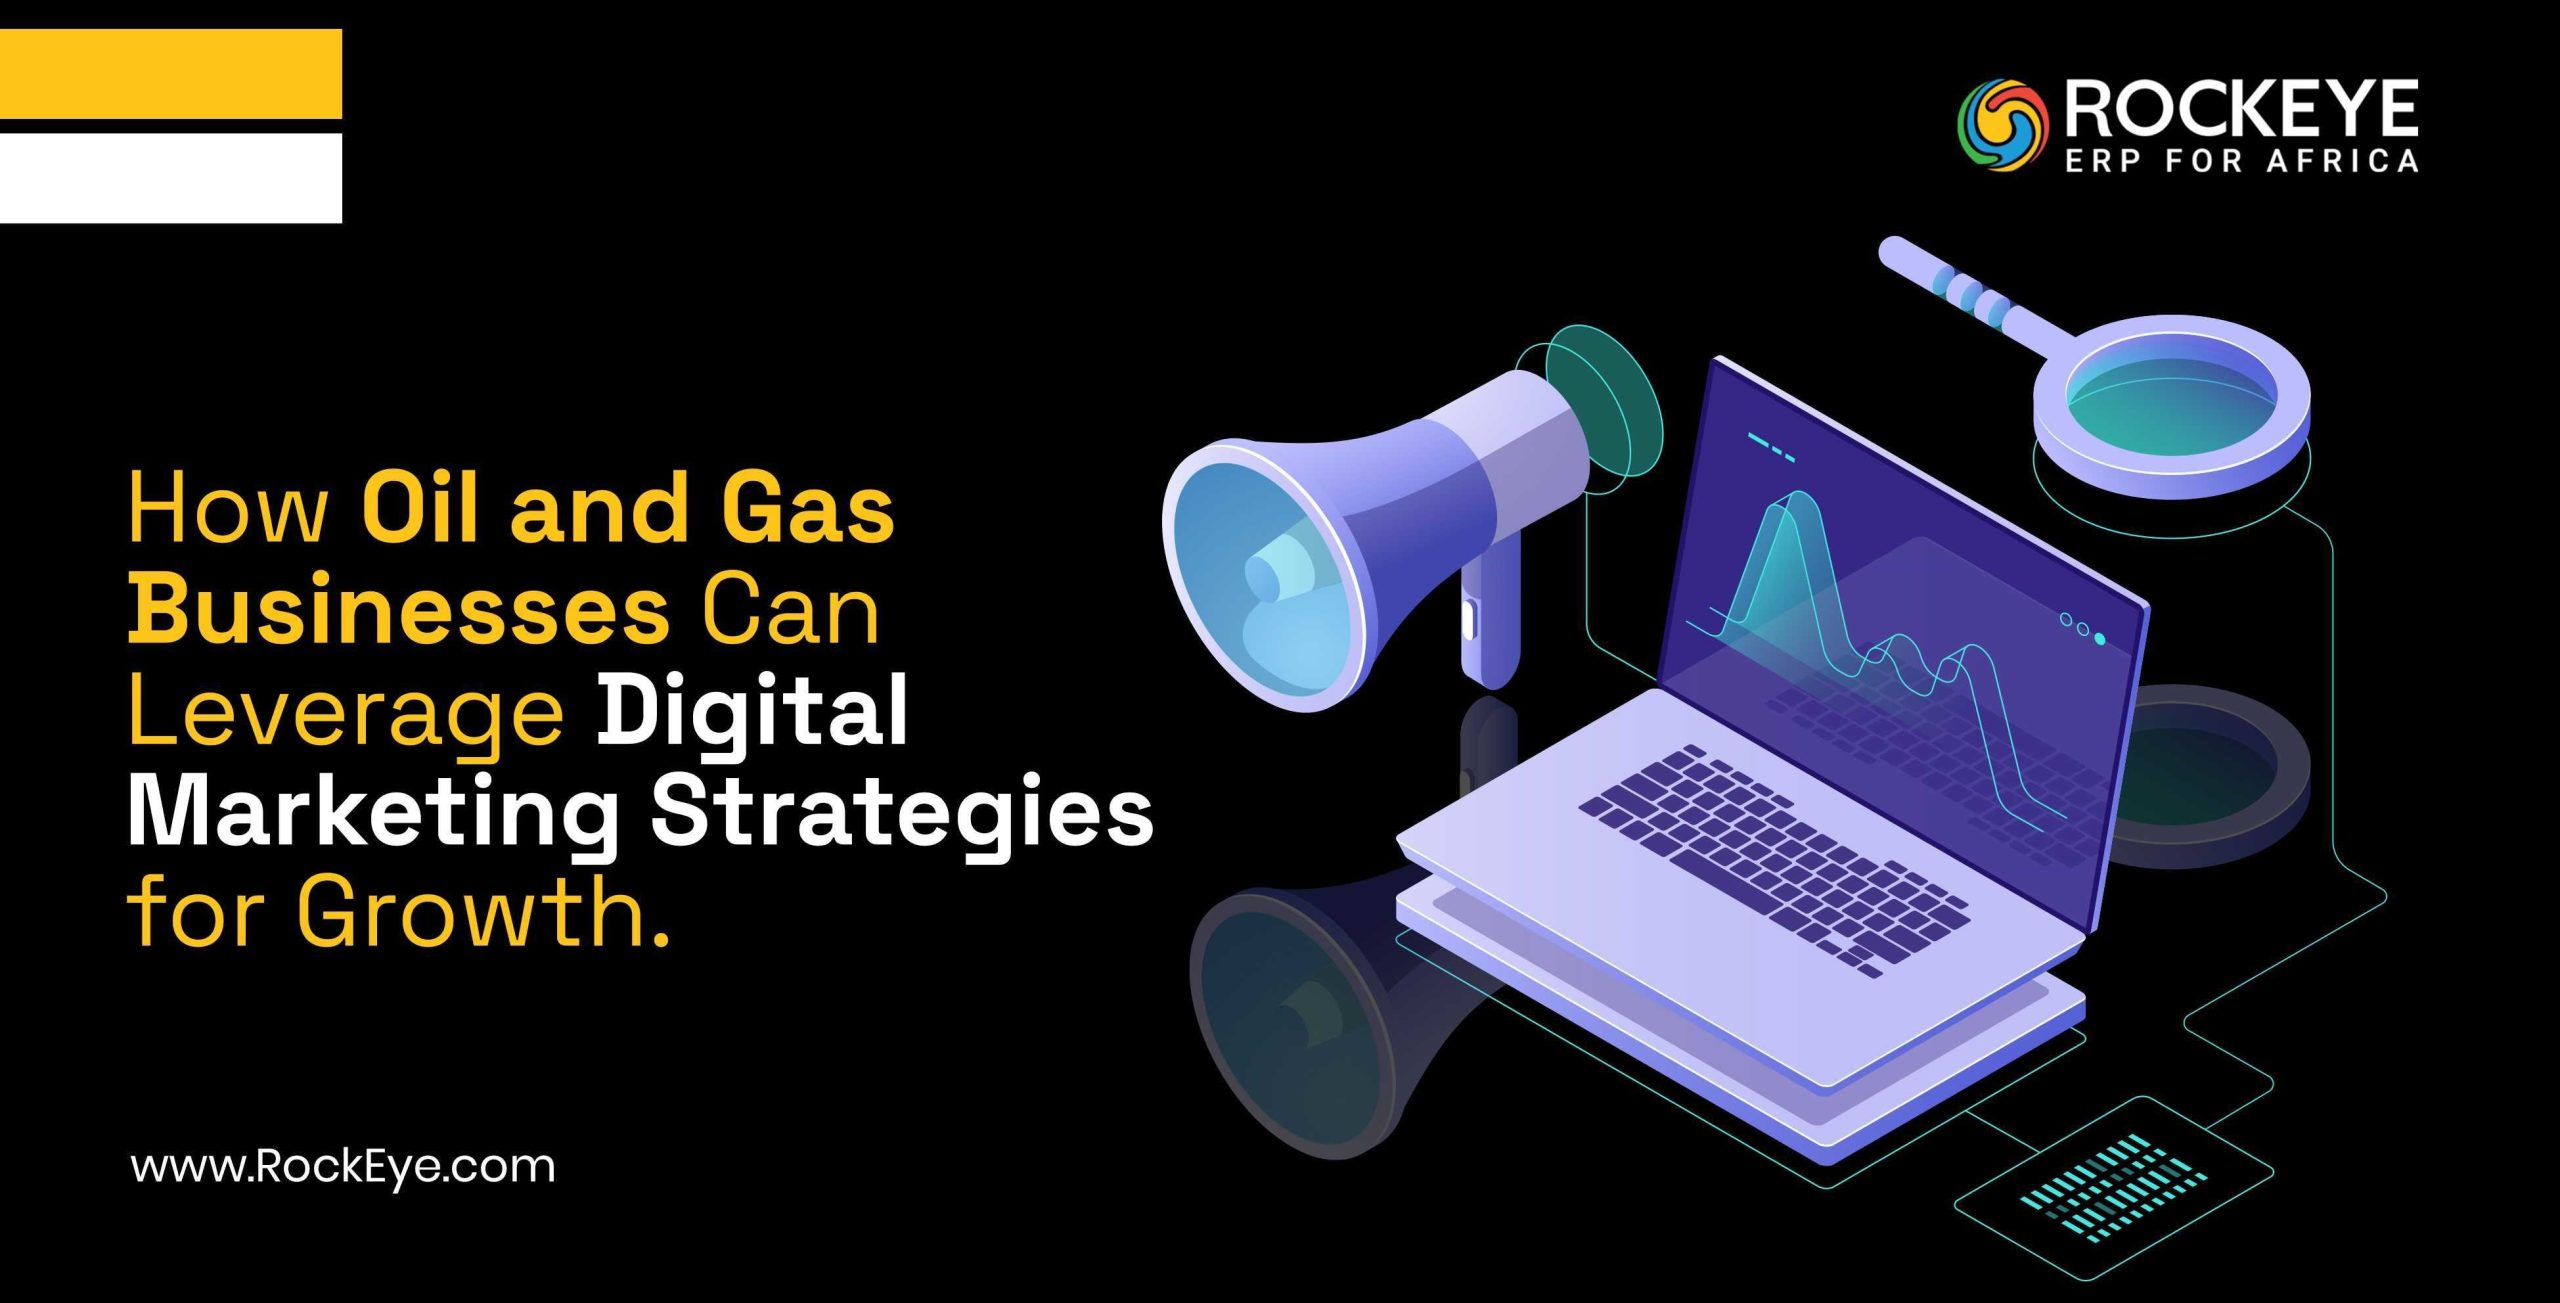 Digital Marketing Strategies for Oil and Gas Businesses